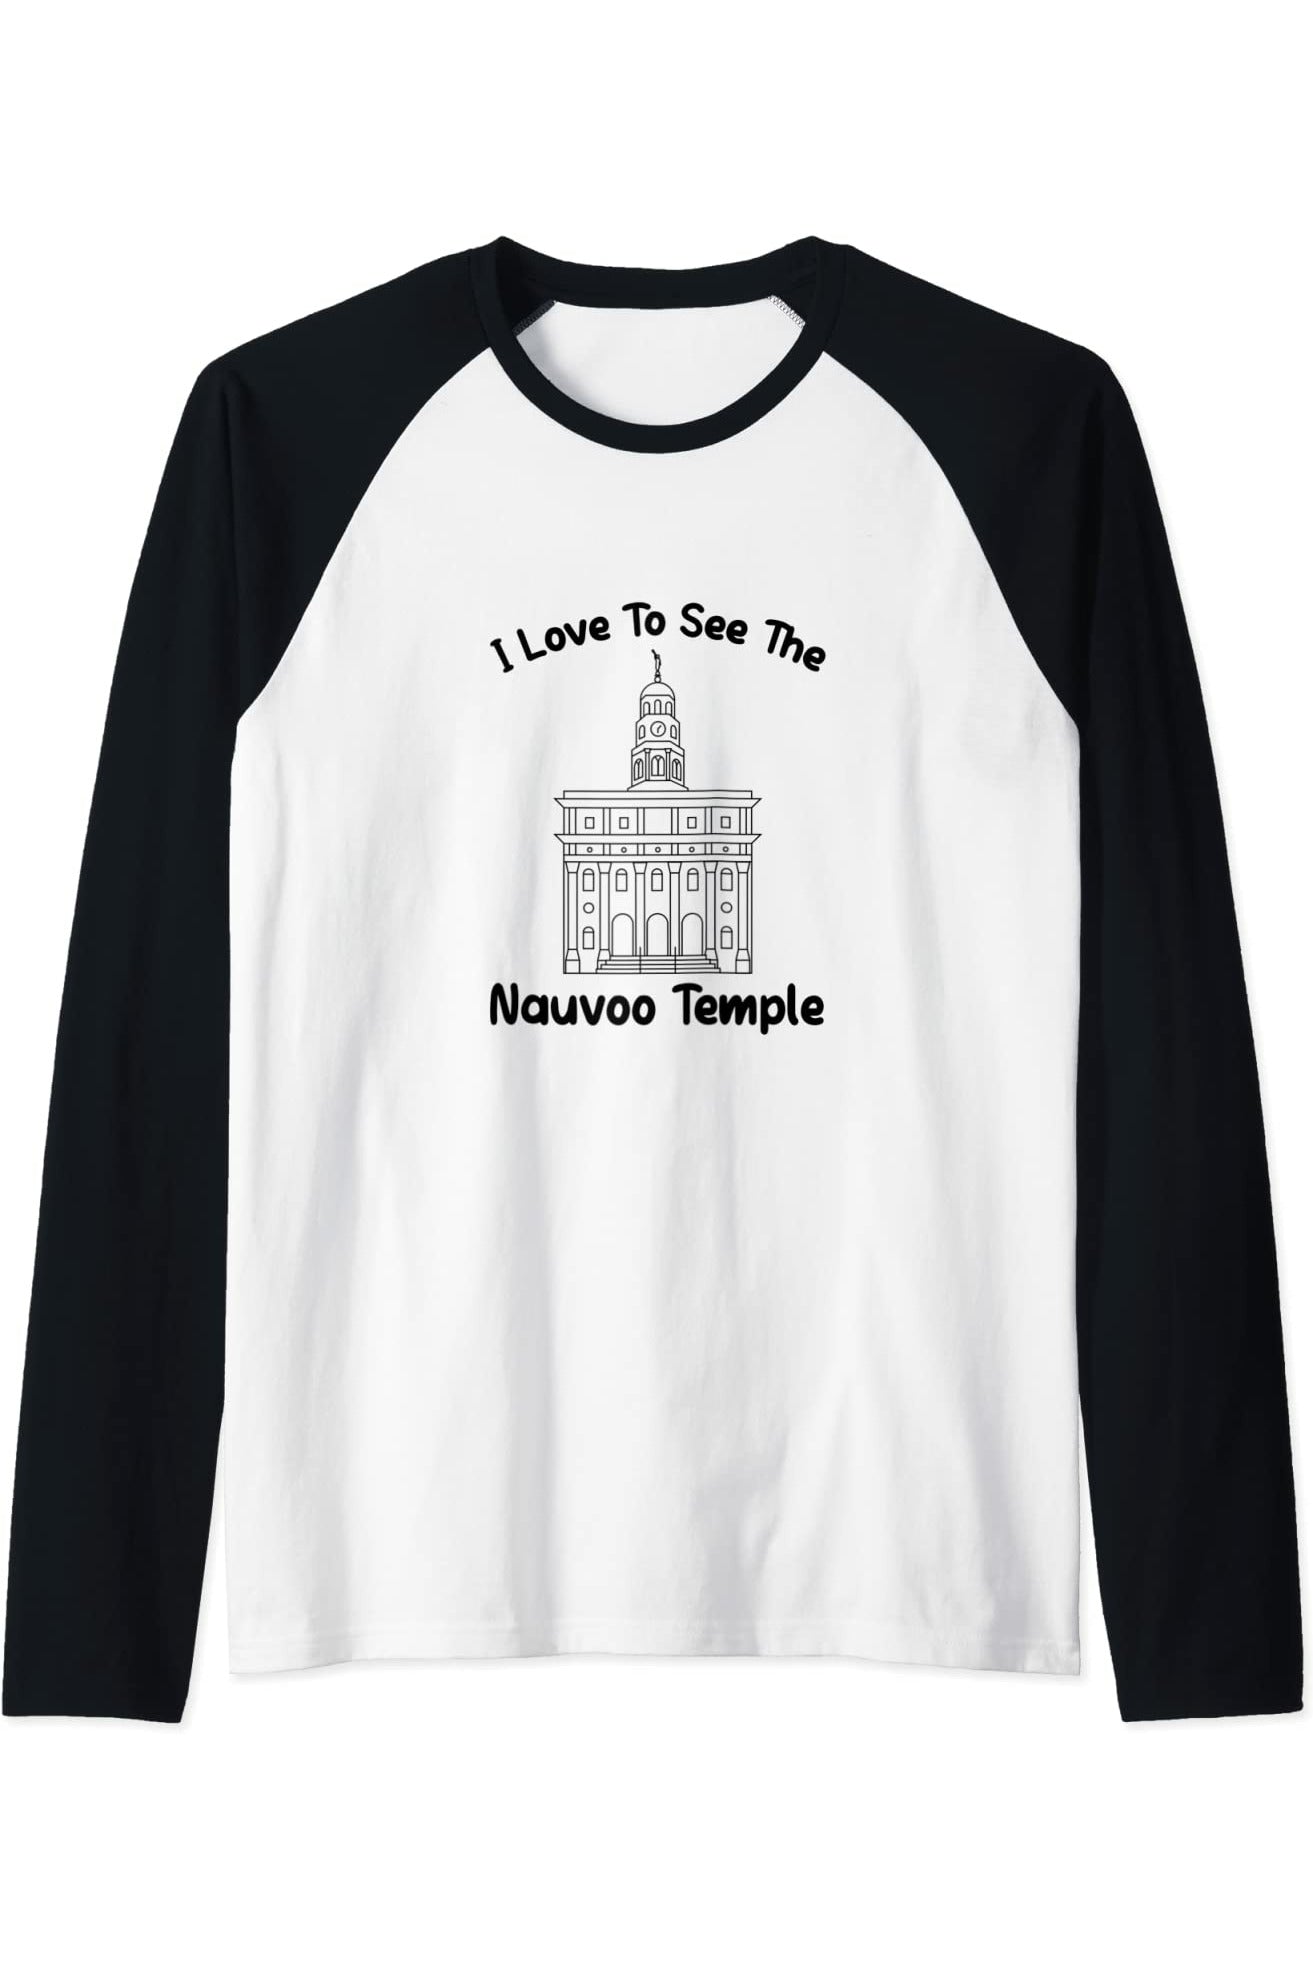 Nauvoo IL Temple, I love to see my temple, primary Raglan T-Shirt